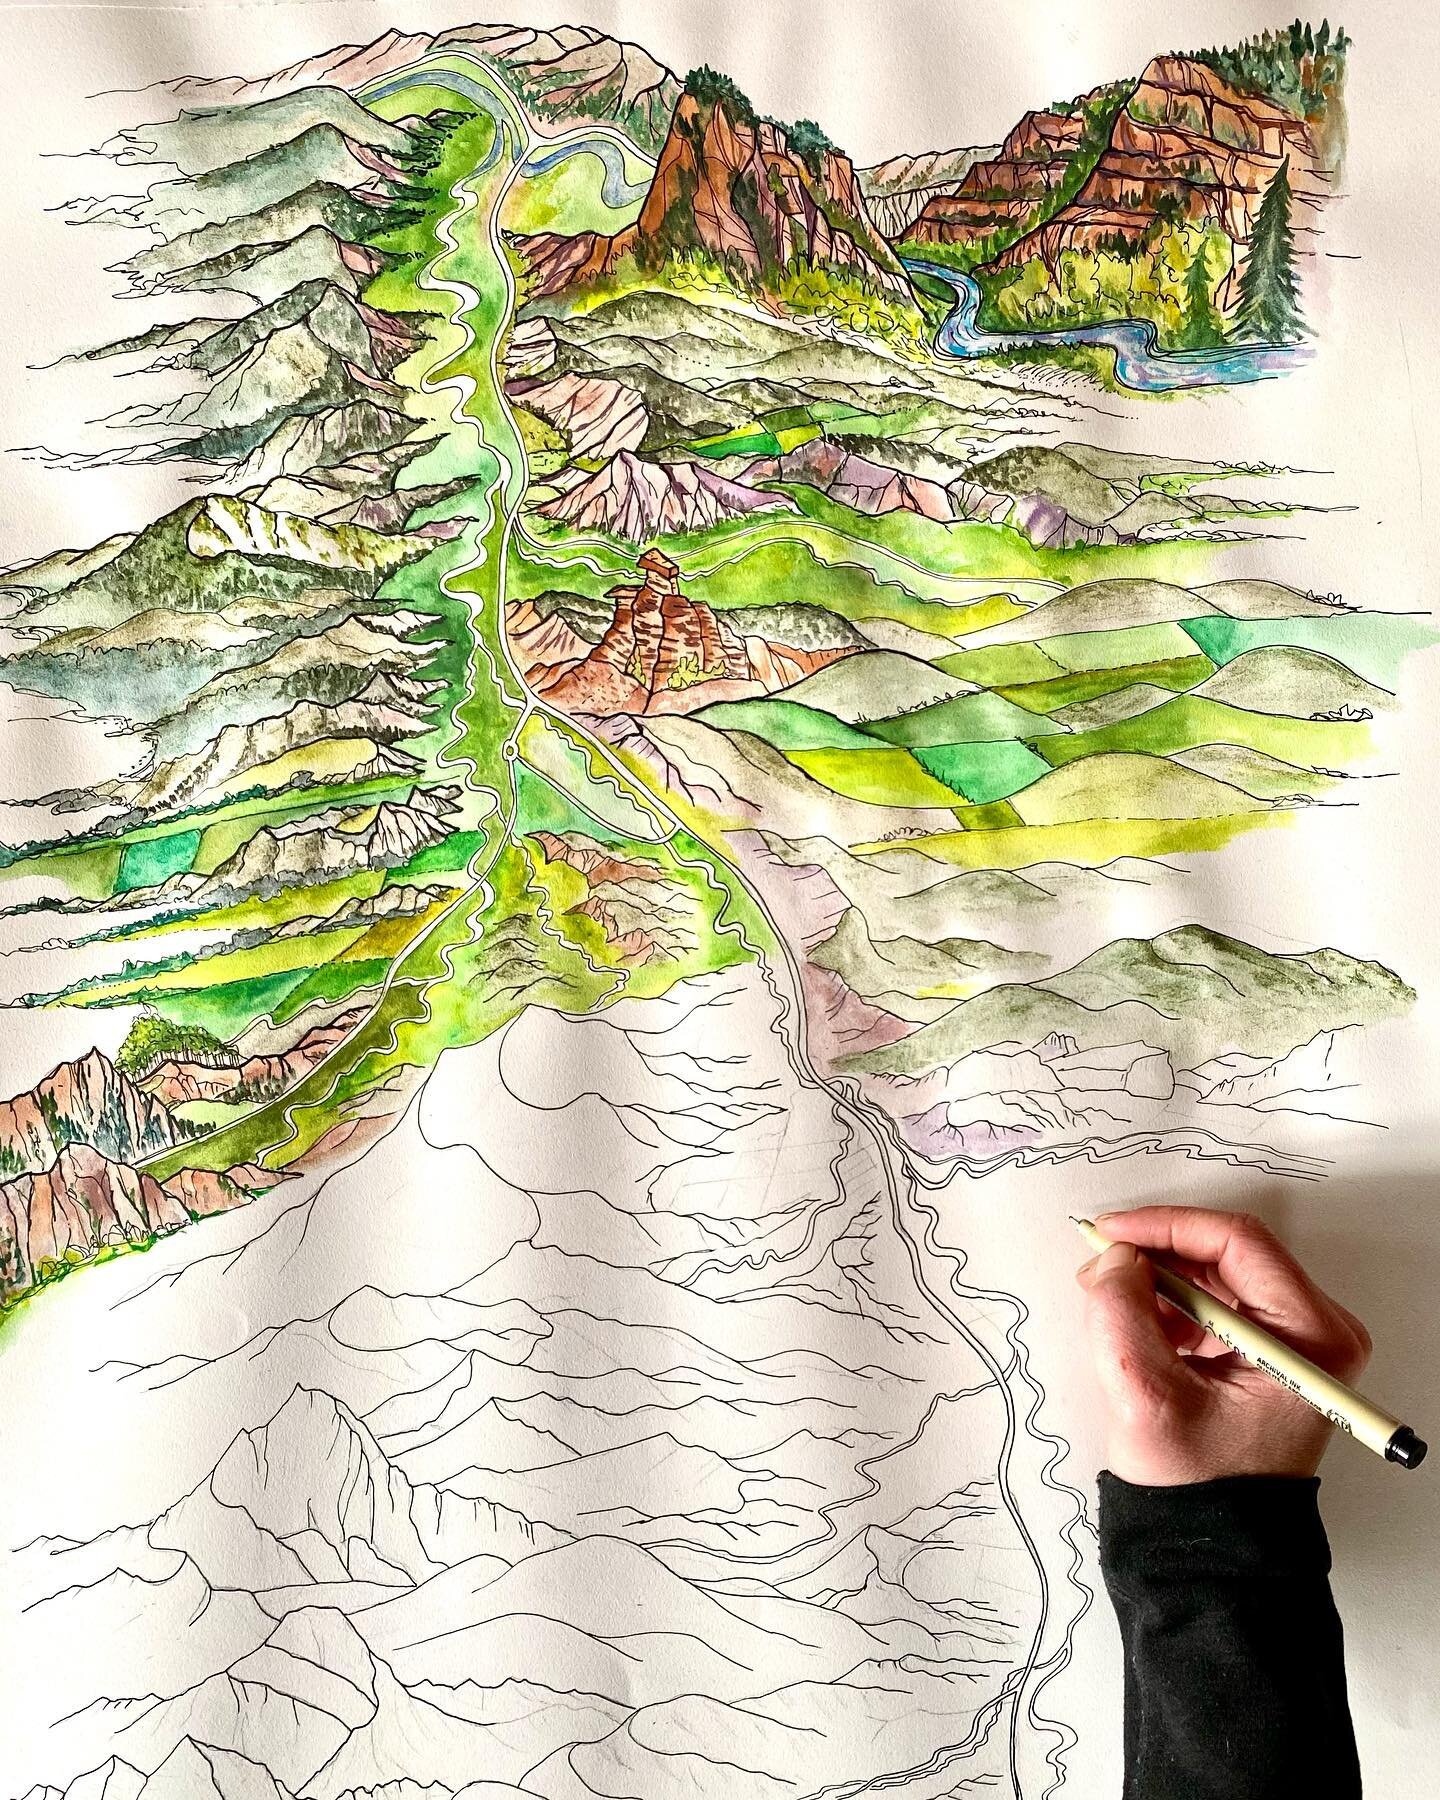 This is my home. It&rsquo;s a place I&rsquo;ve illustrated six times now for different projects. Each time I make a map of the Roaring Fork Valley, I fall more in love. It gives me the opportunity to pay tribute to the landscape that holds me dear, s